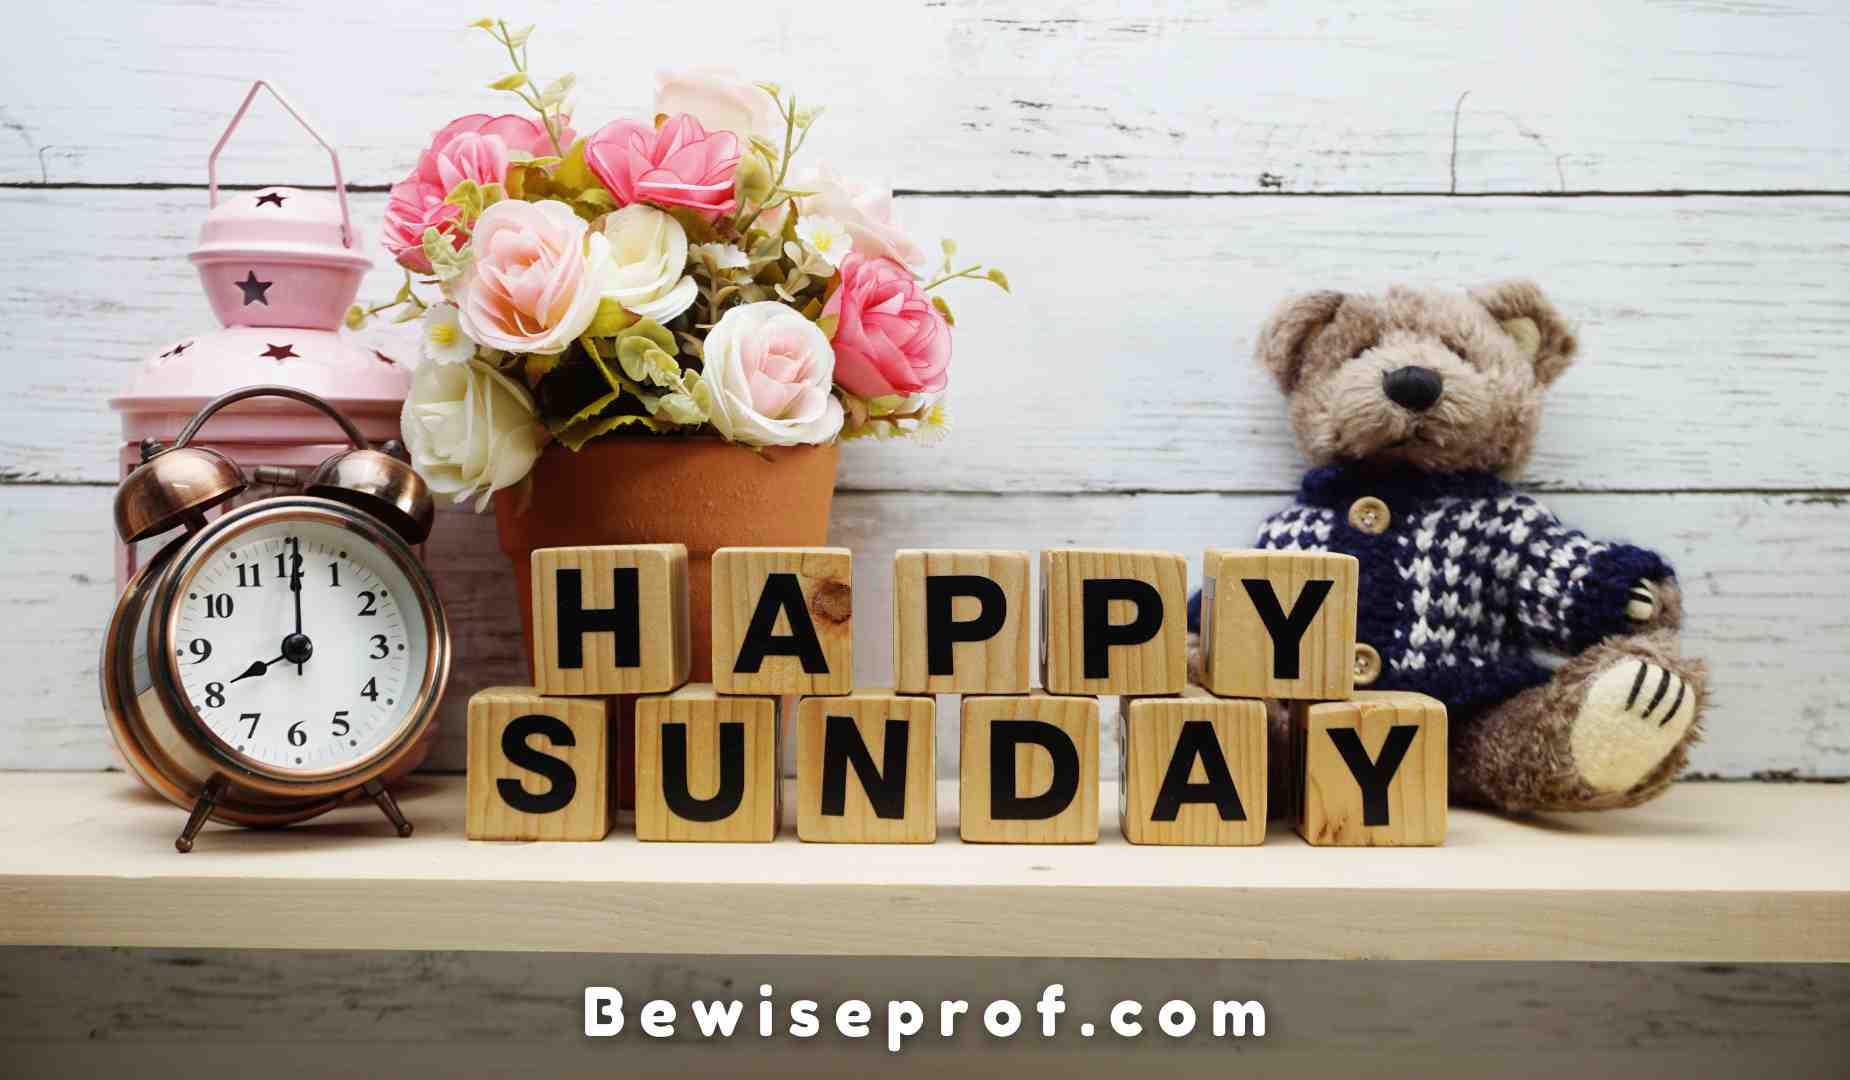 List Of 90+ Happy Sunday Blessings To Wish Those You Care About A Beautiful Day